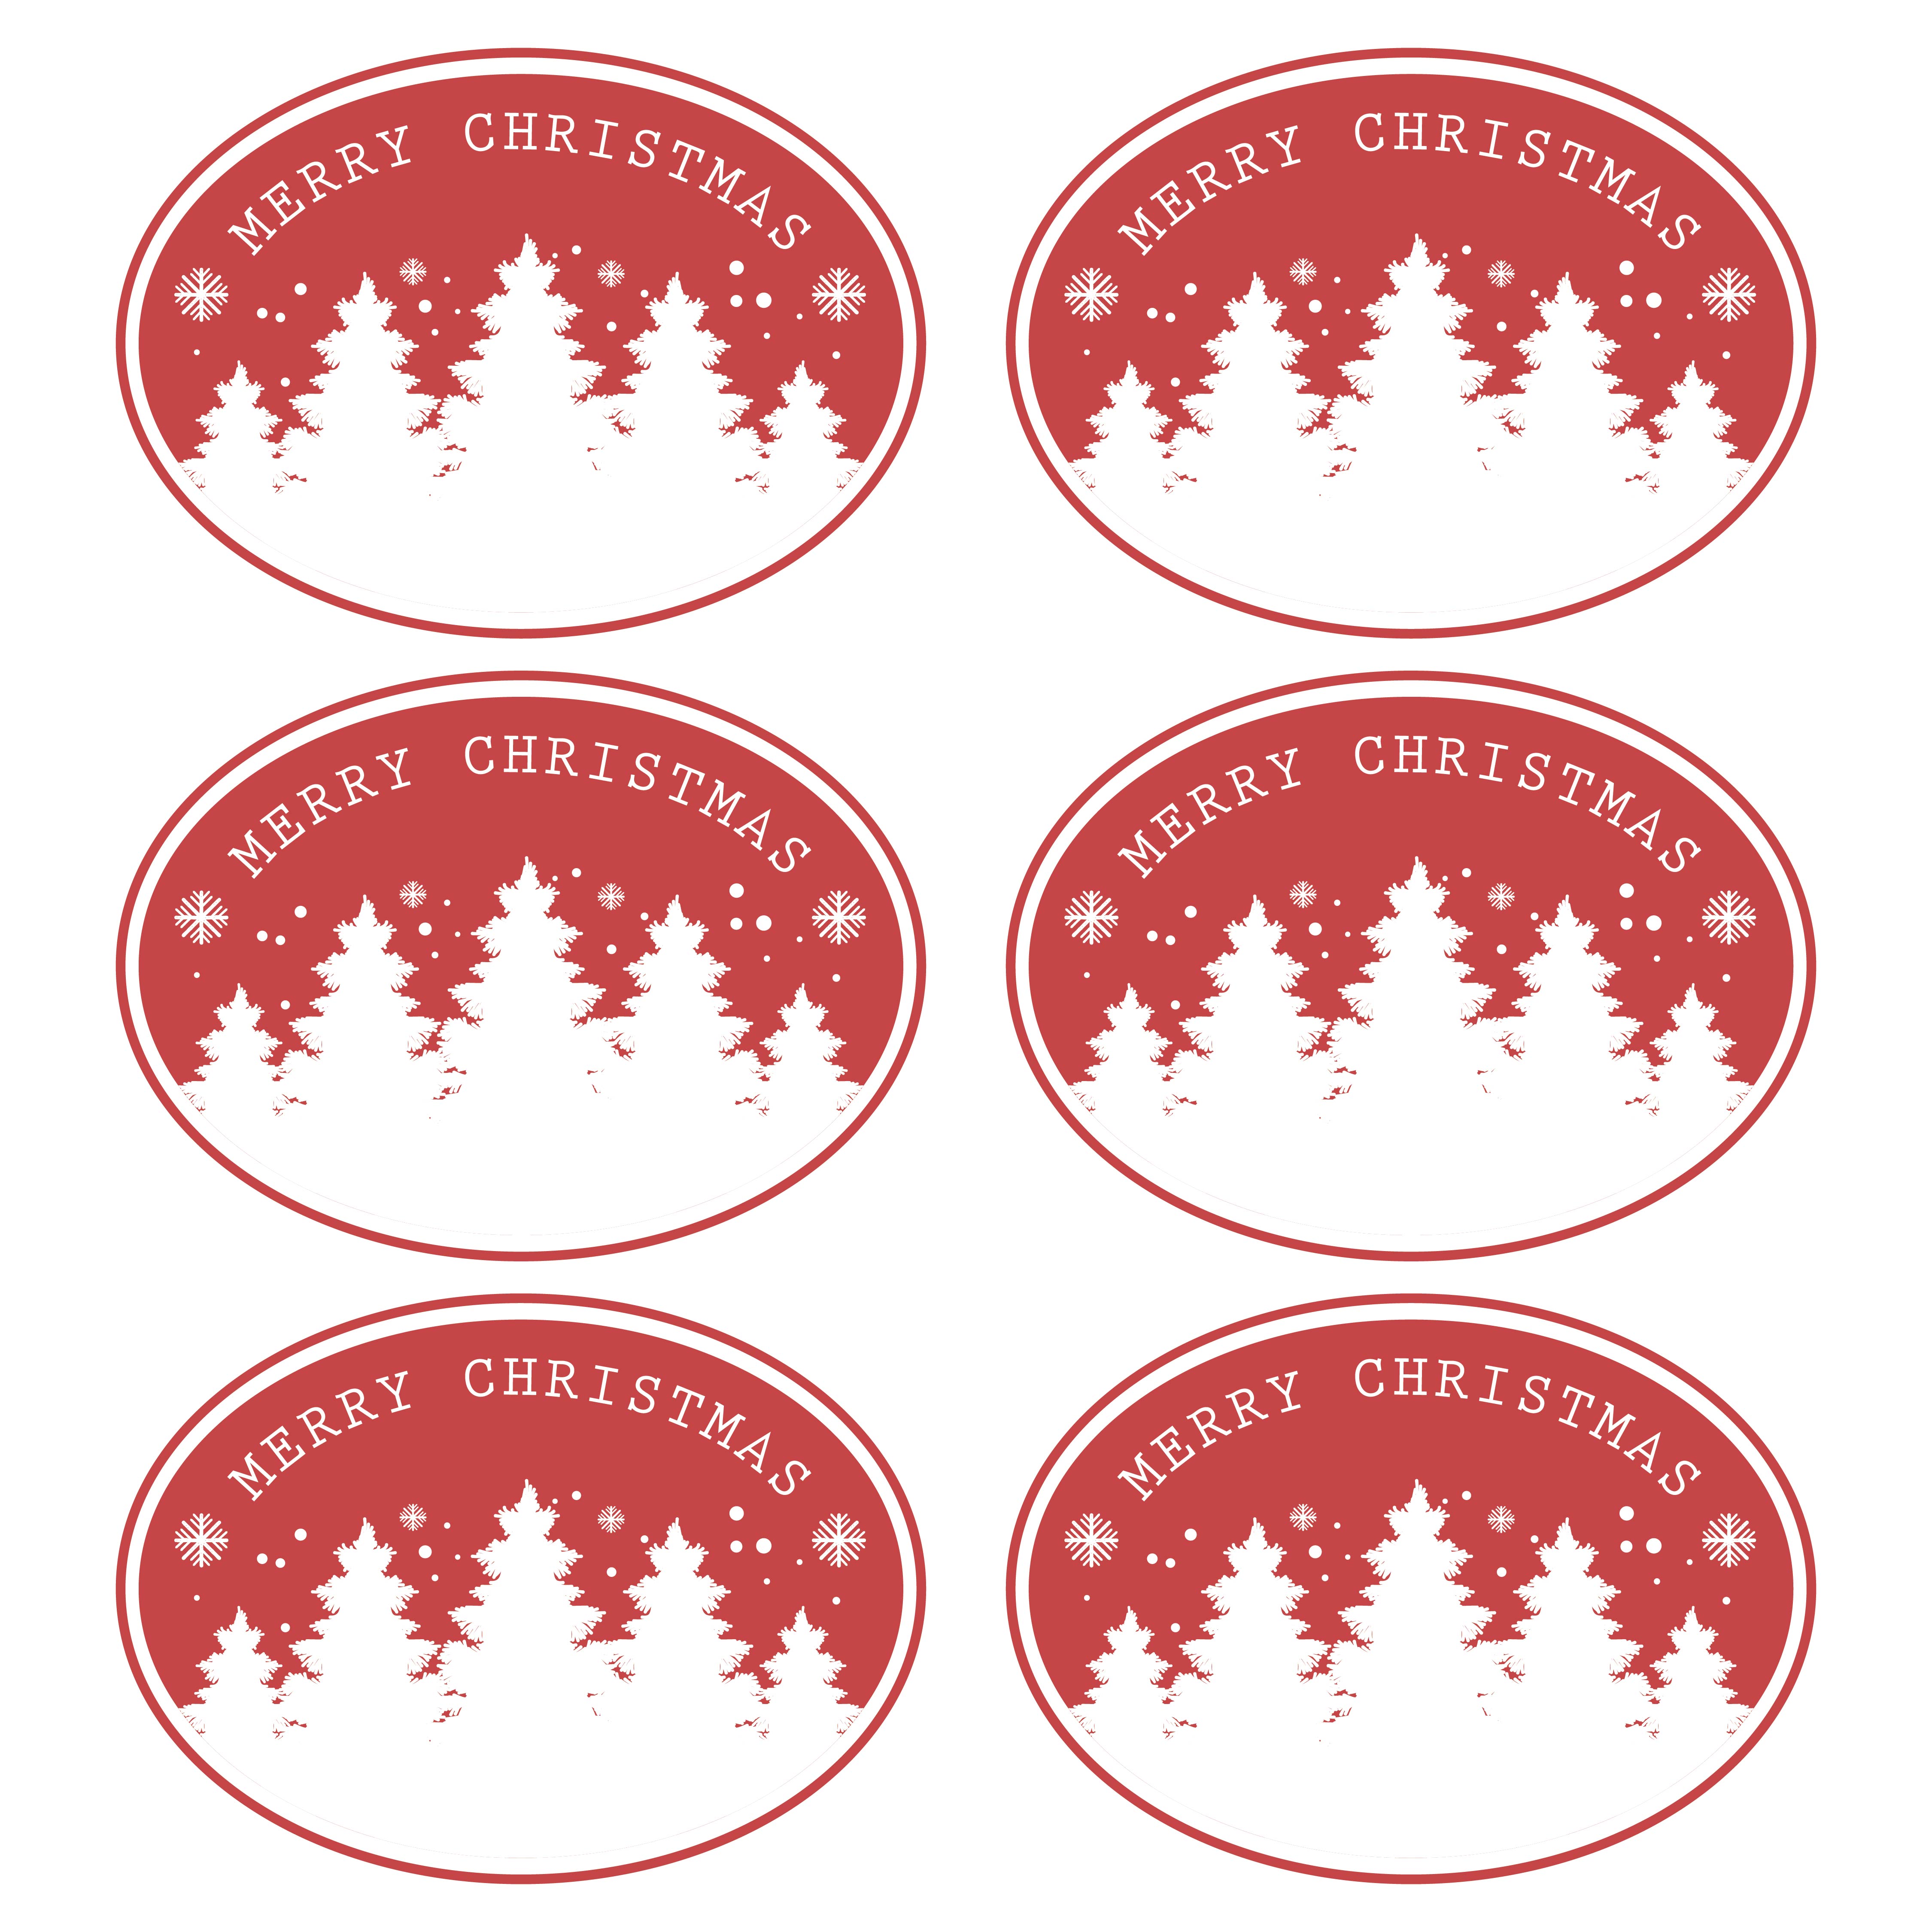 6-best-images-of-free-printable-christmas-gift-tags-pdf-free-printable-christmas-gift-tags